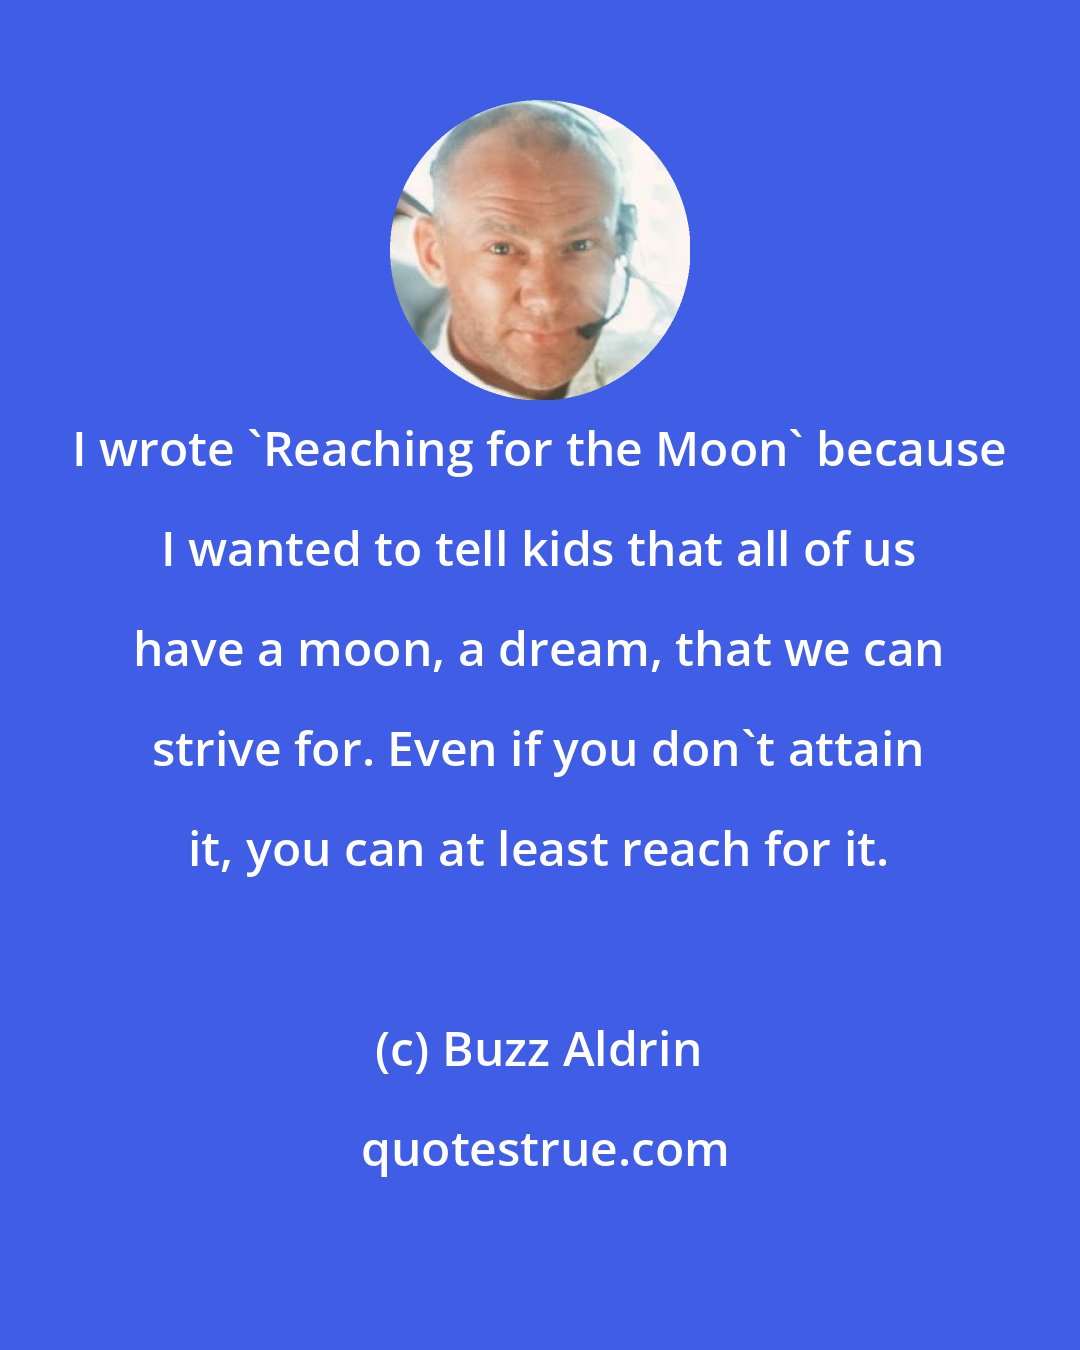 Buzz Aldrin: I wrote 'Reaching for the Moon' because I wanted to tell kids that all of us have a moon, a dream, that we can strive for. Even if you don't attain it, you can at least reach for it.